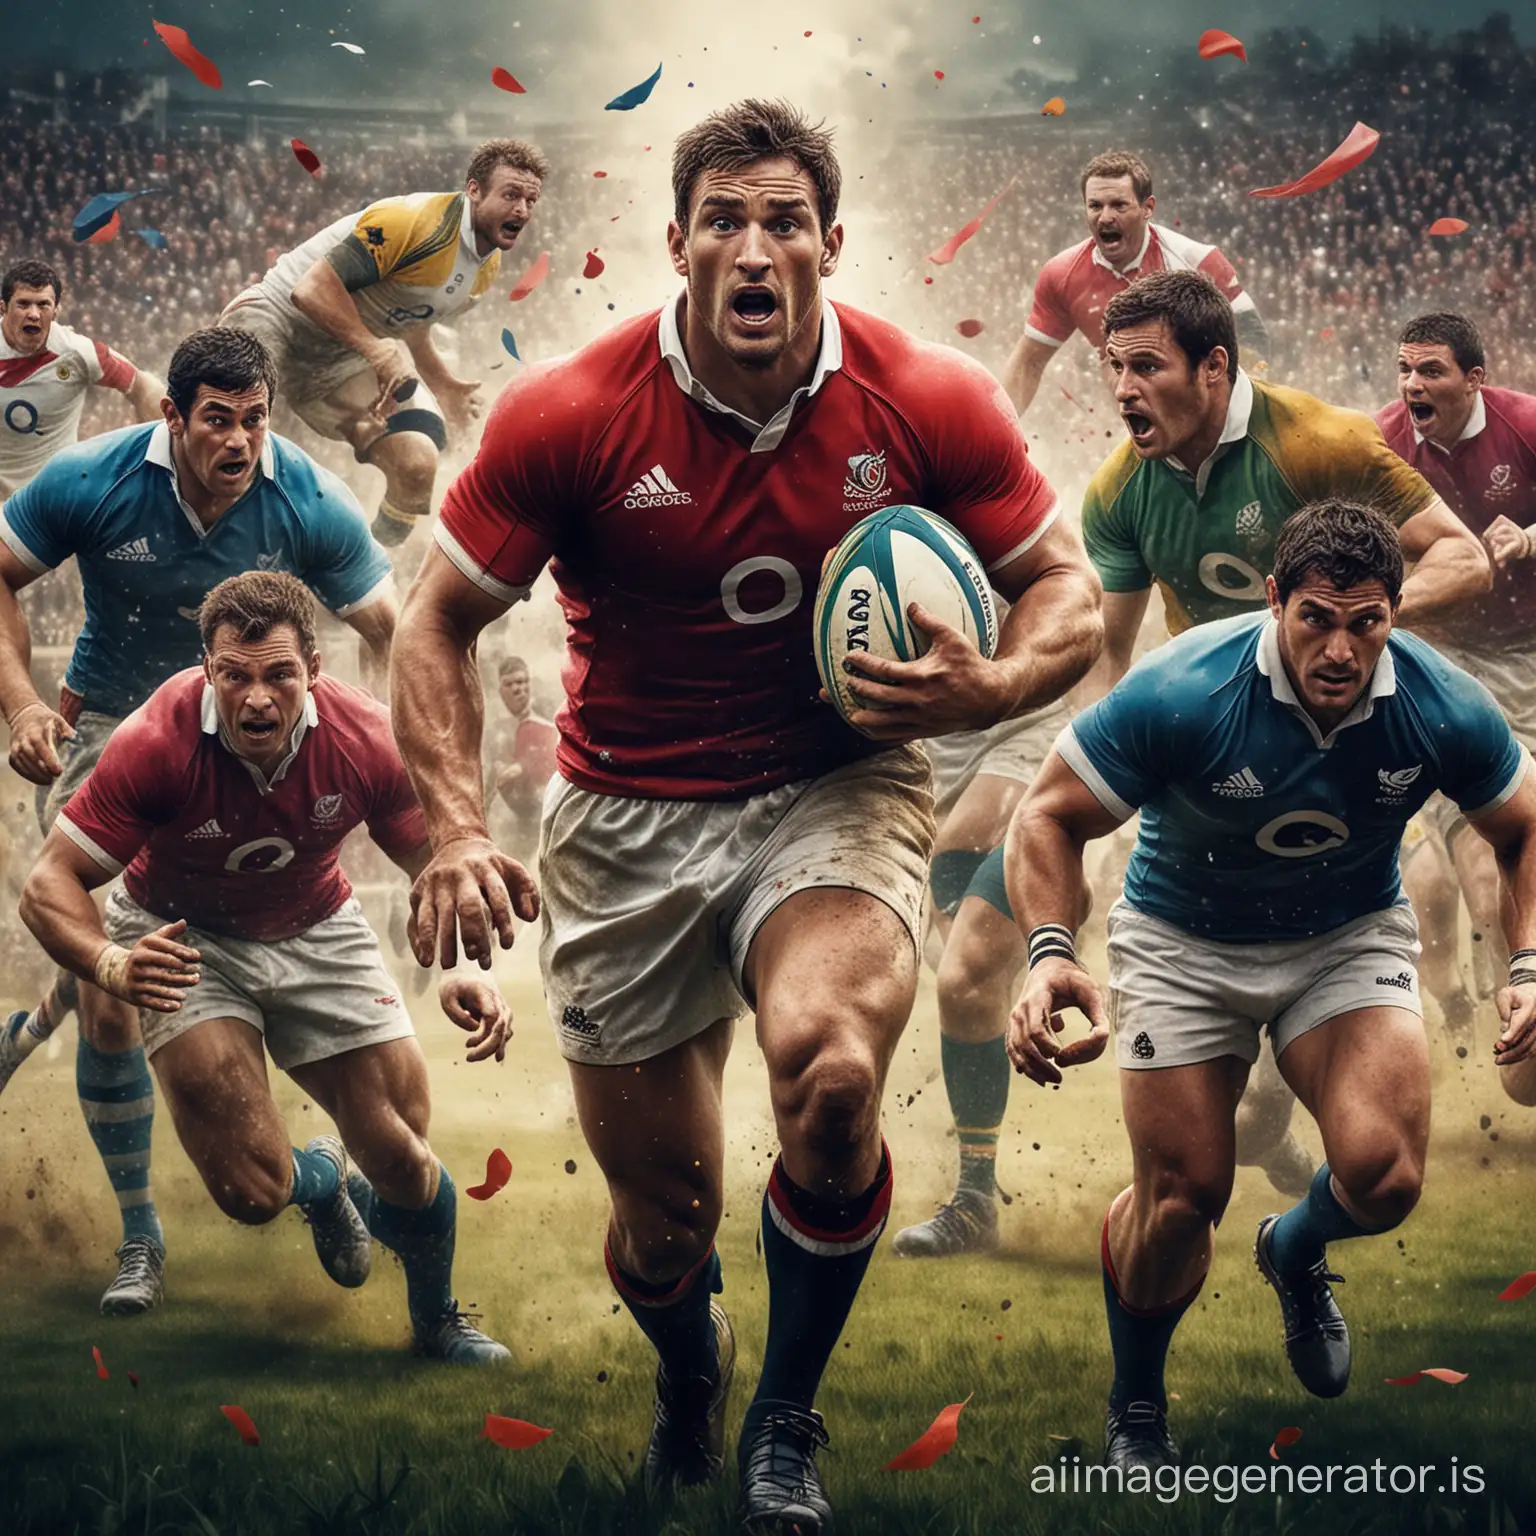  A striking movie poster for "The Art of RUGBY" features a diverse group of RUGBY icons, each holding a unique work of art that symbolizes their respective movements and struggles. The background is an energetic and bold color palette, with a mix of abstract and realistic art styles. The overall atmosphere of the poster is inspiring and empowering, as it celebrates the power of art and creativity in the face of adversity. 